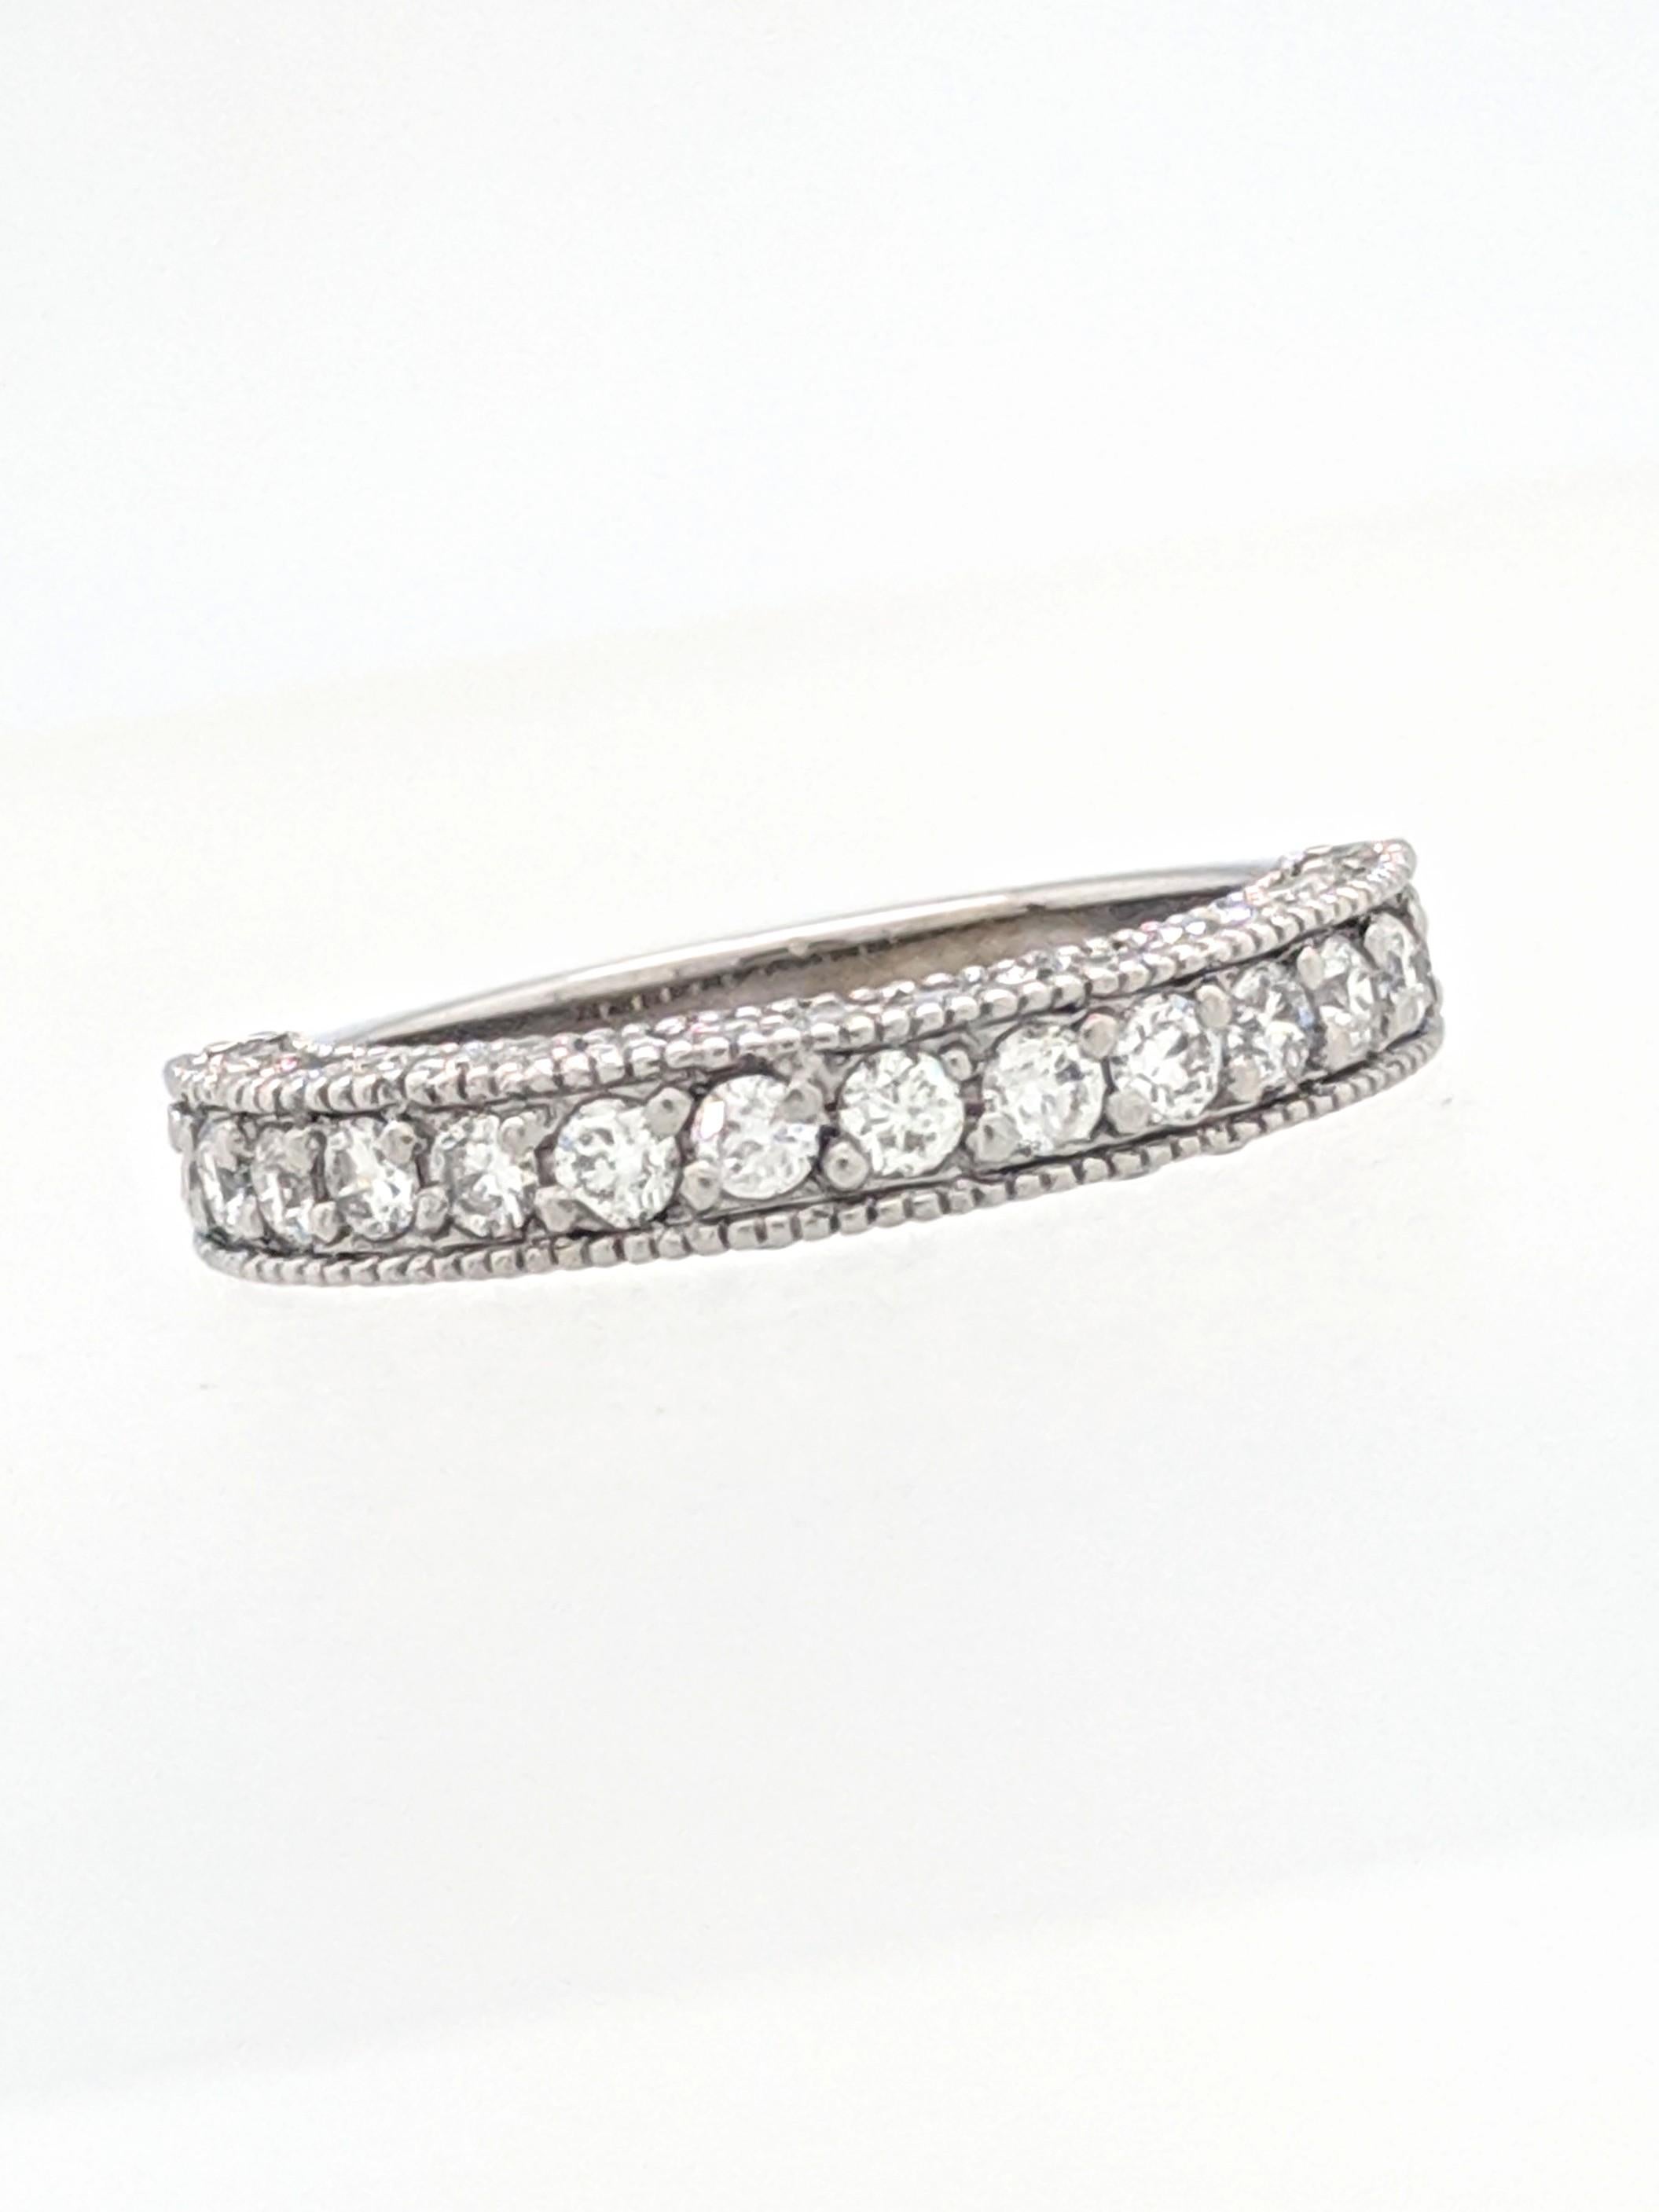 14K White Gold 1tcw Diamond Stackable Anniversary Wedding Band

You are viewing a beautiful beaded edge diamond stackable band. This ring is crafted from 14k white gold and weighs 3.3 grams. It features natural round brilliant cut diamonds for an